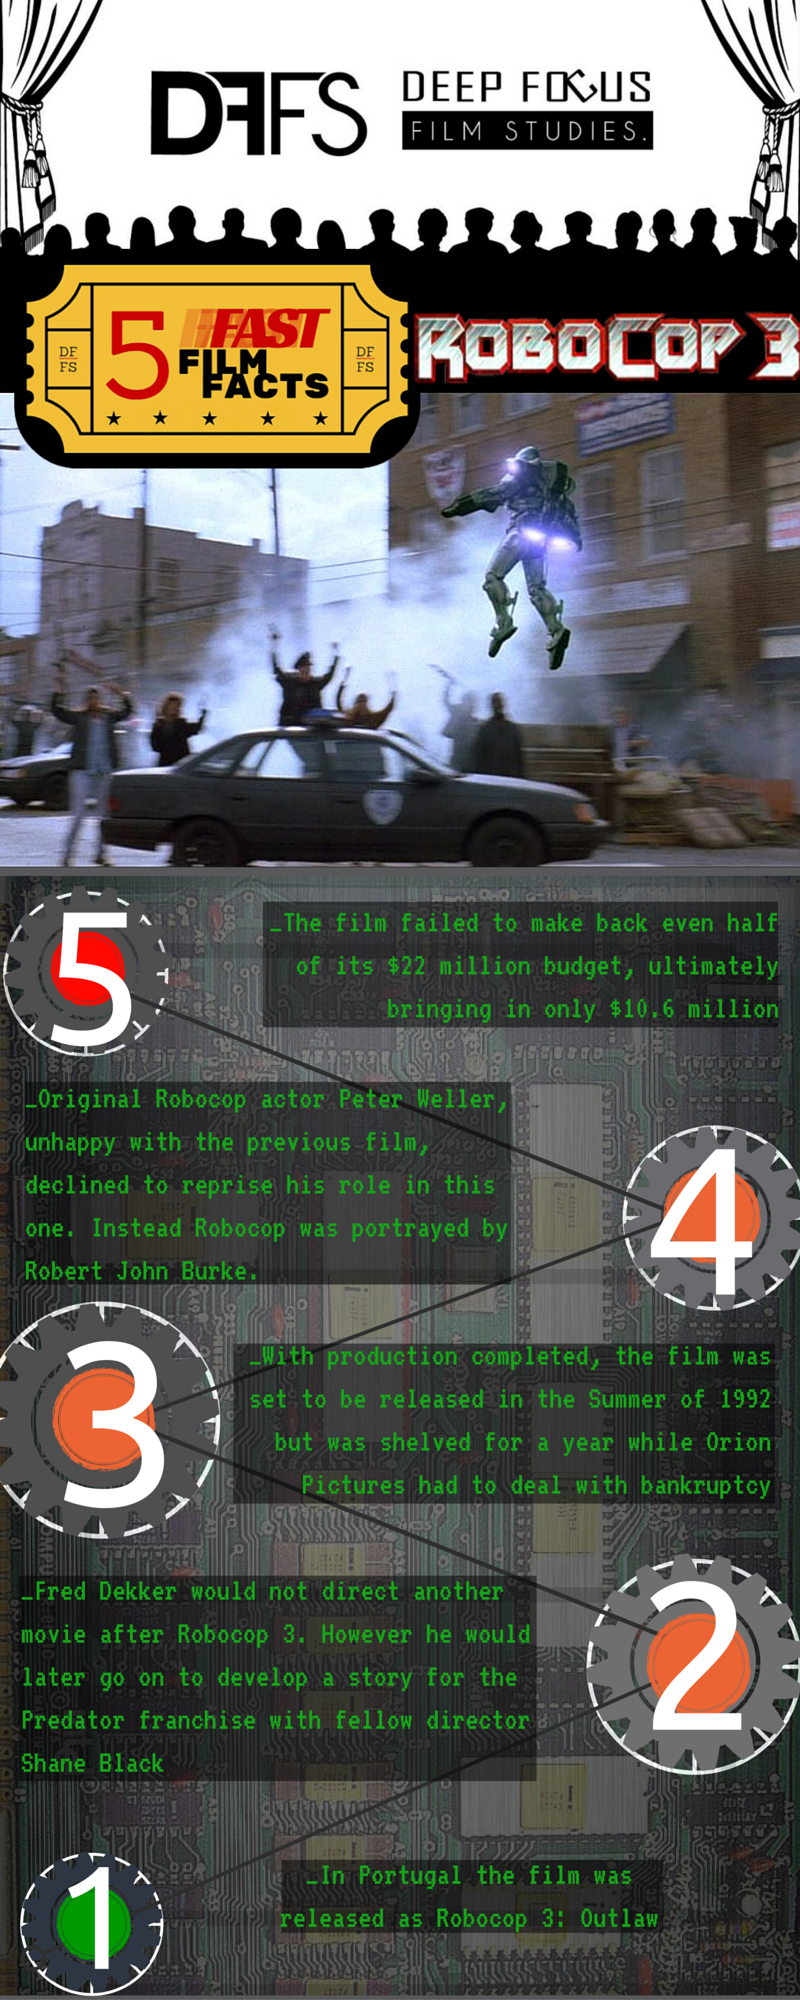 Infographic of trivia on the film Robocop 3